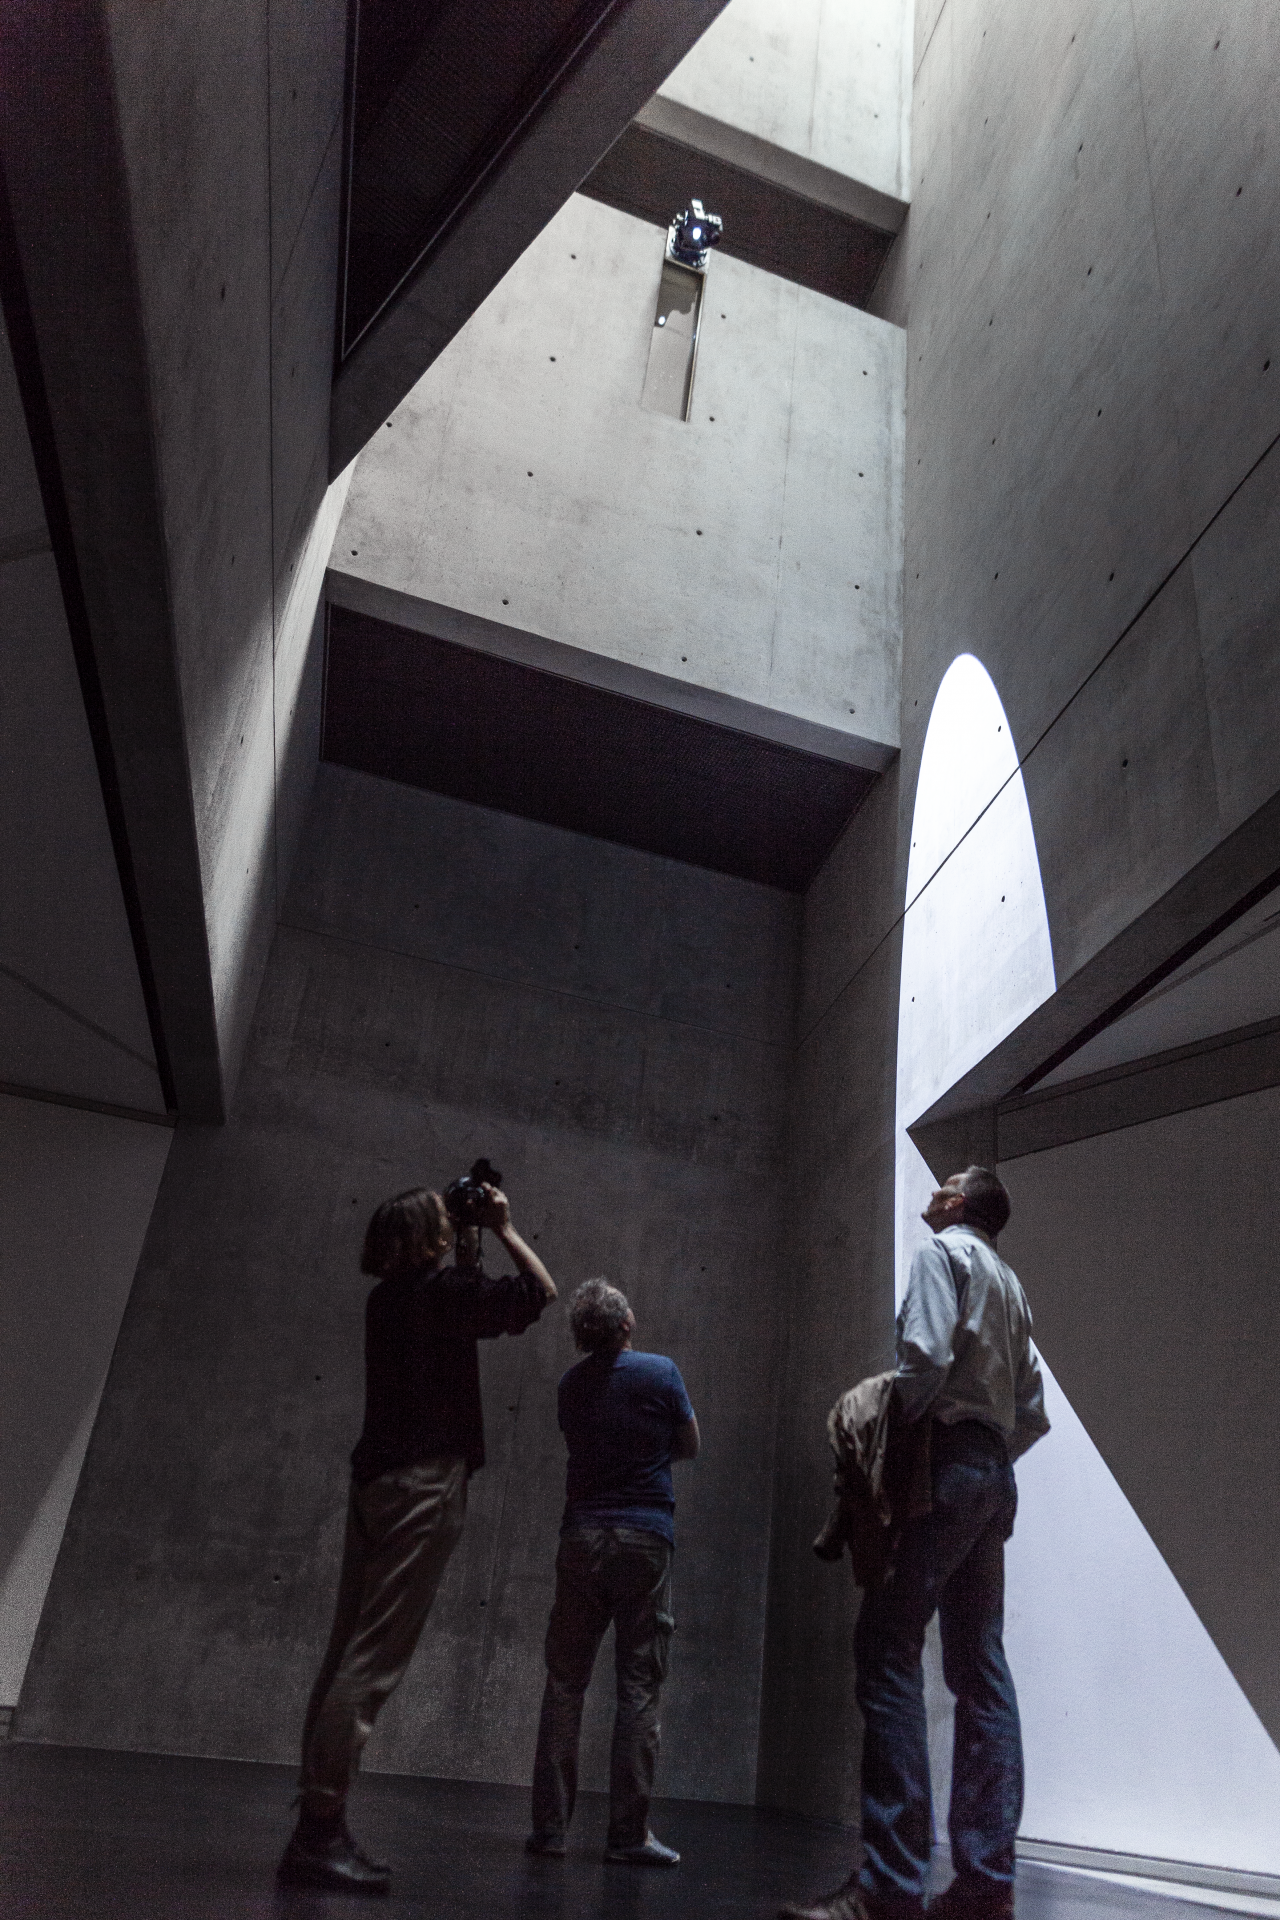 You can see 3 people in a high room with concrete walls where the sunlight shines in from above